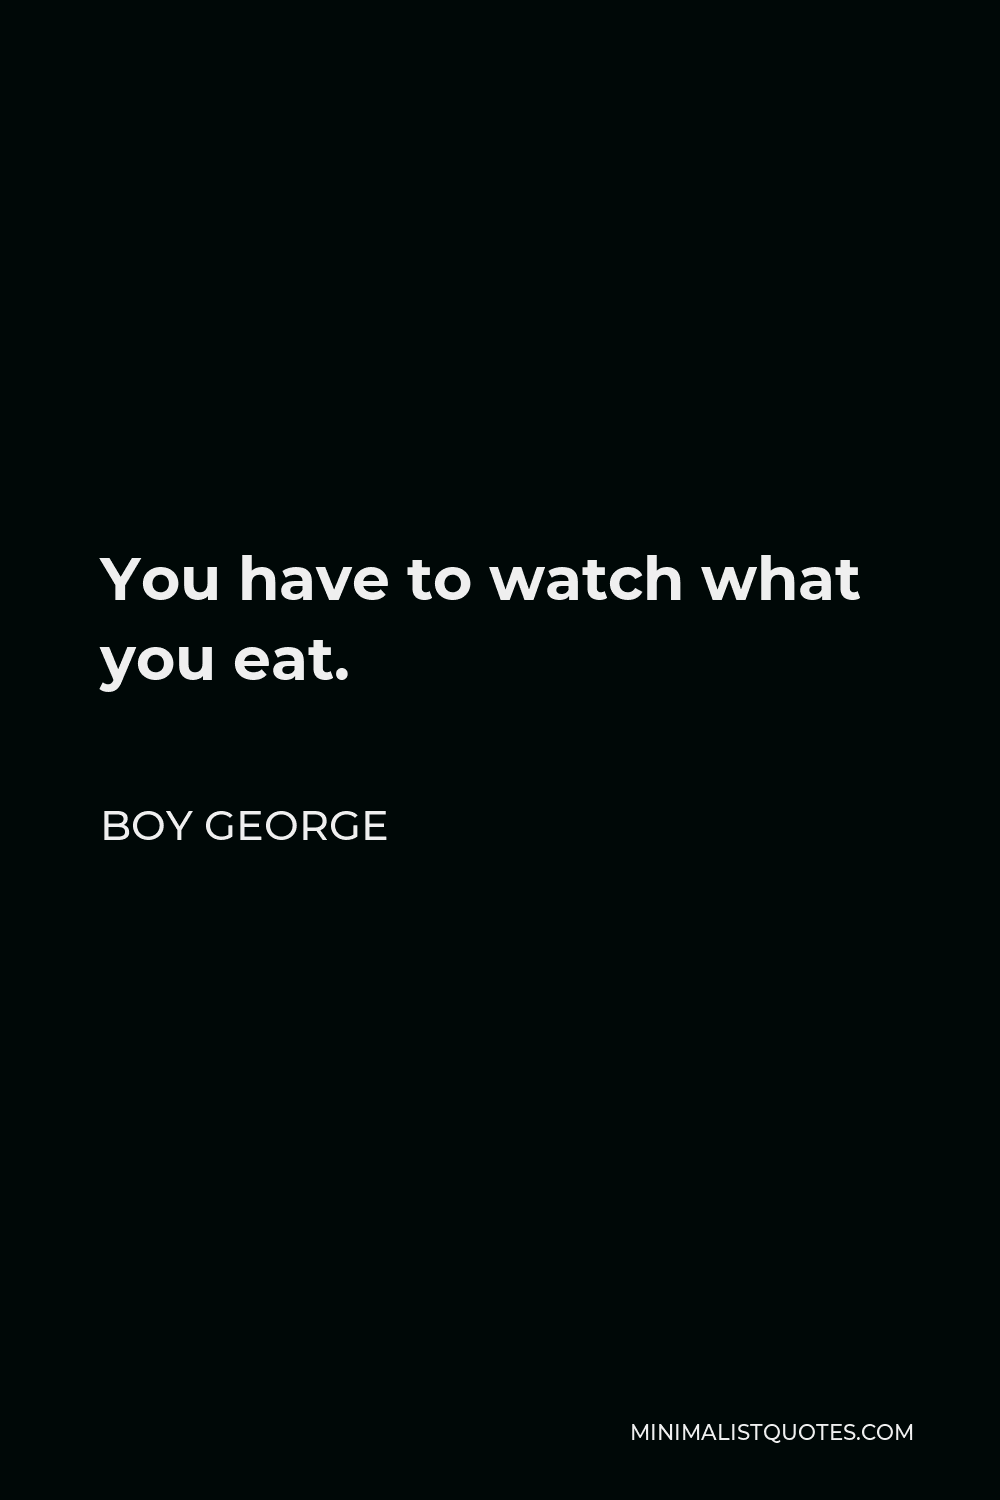 Boy George Quote - You have to watch what you eat.